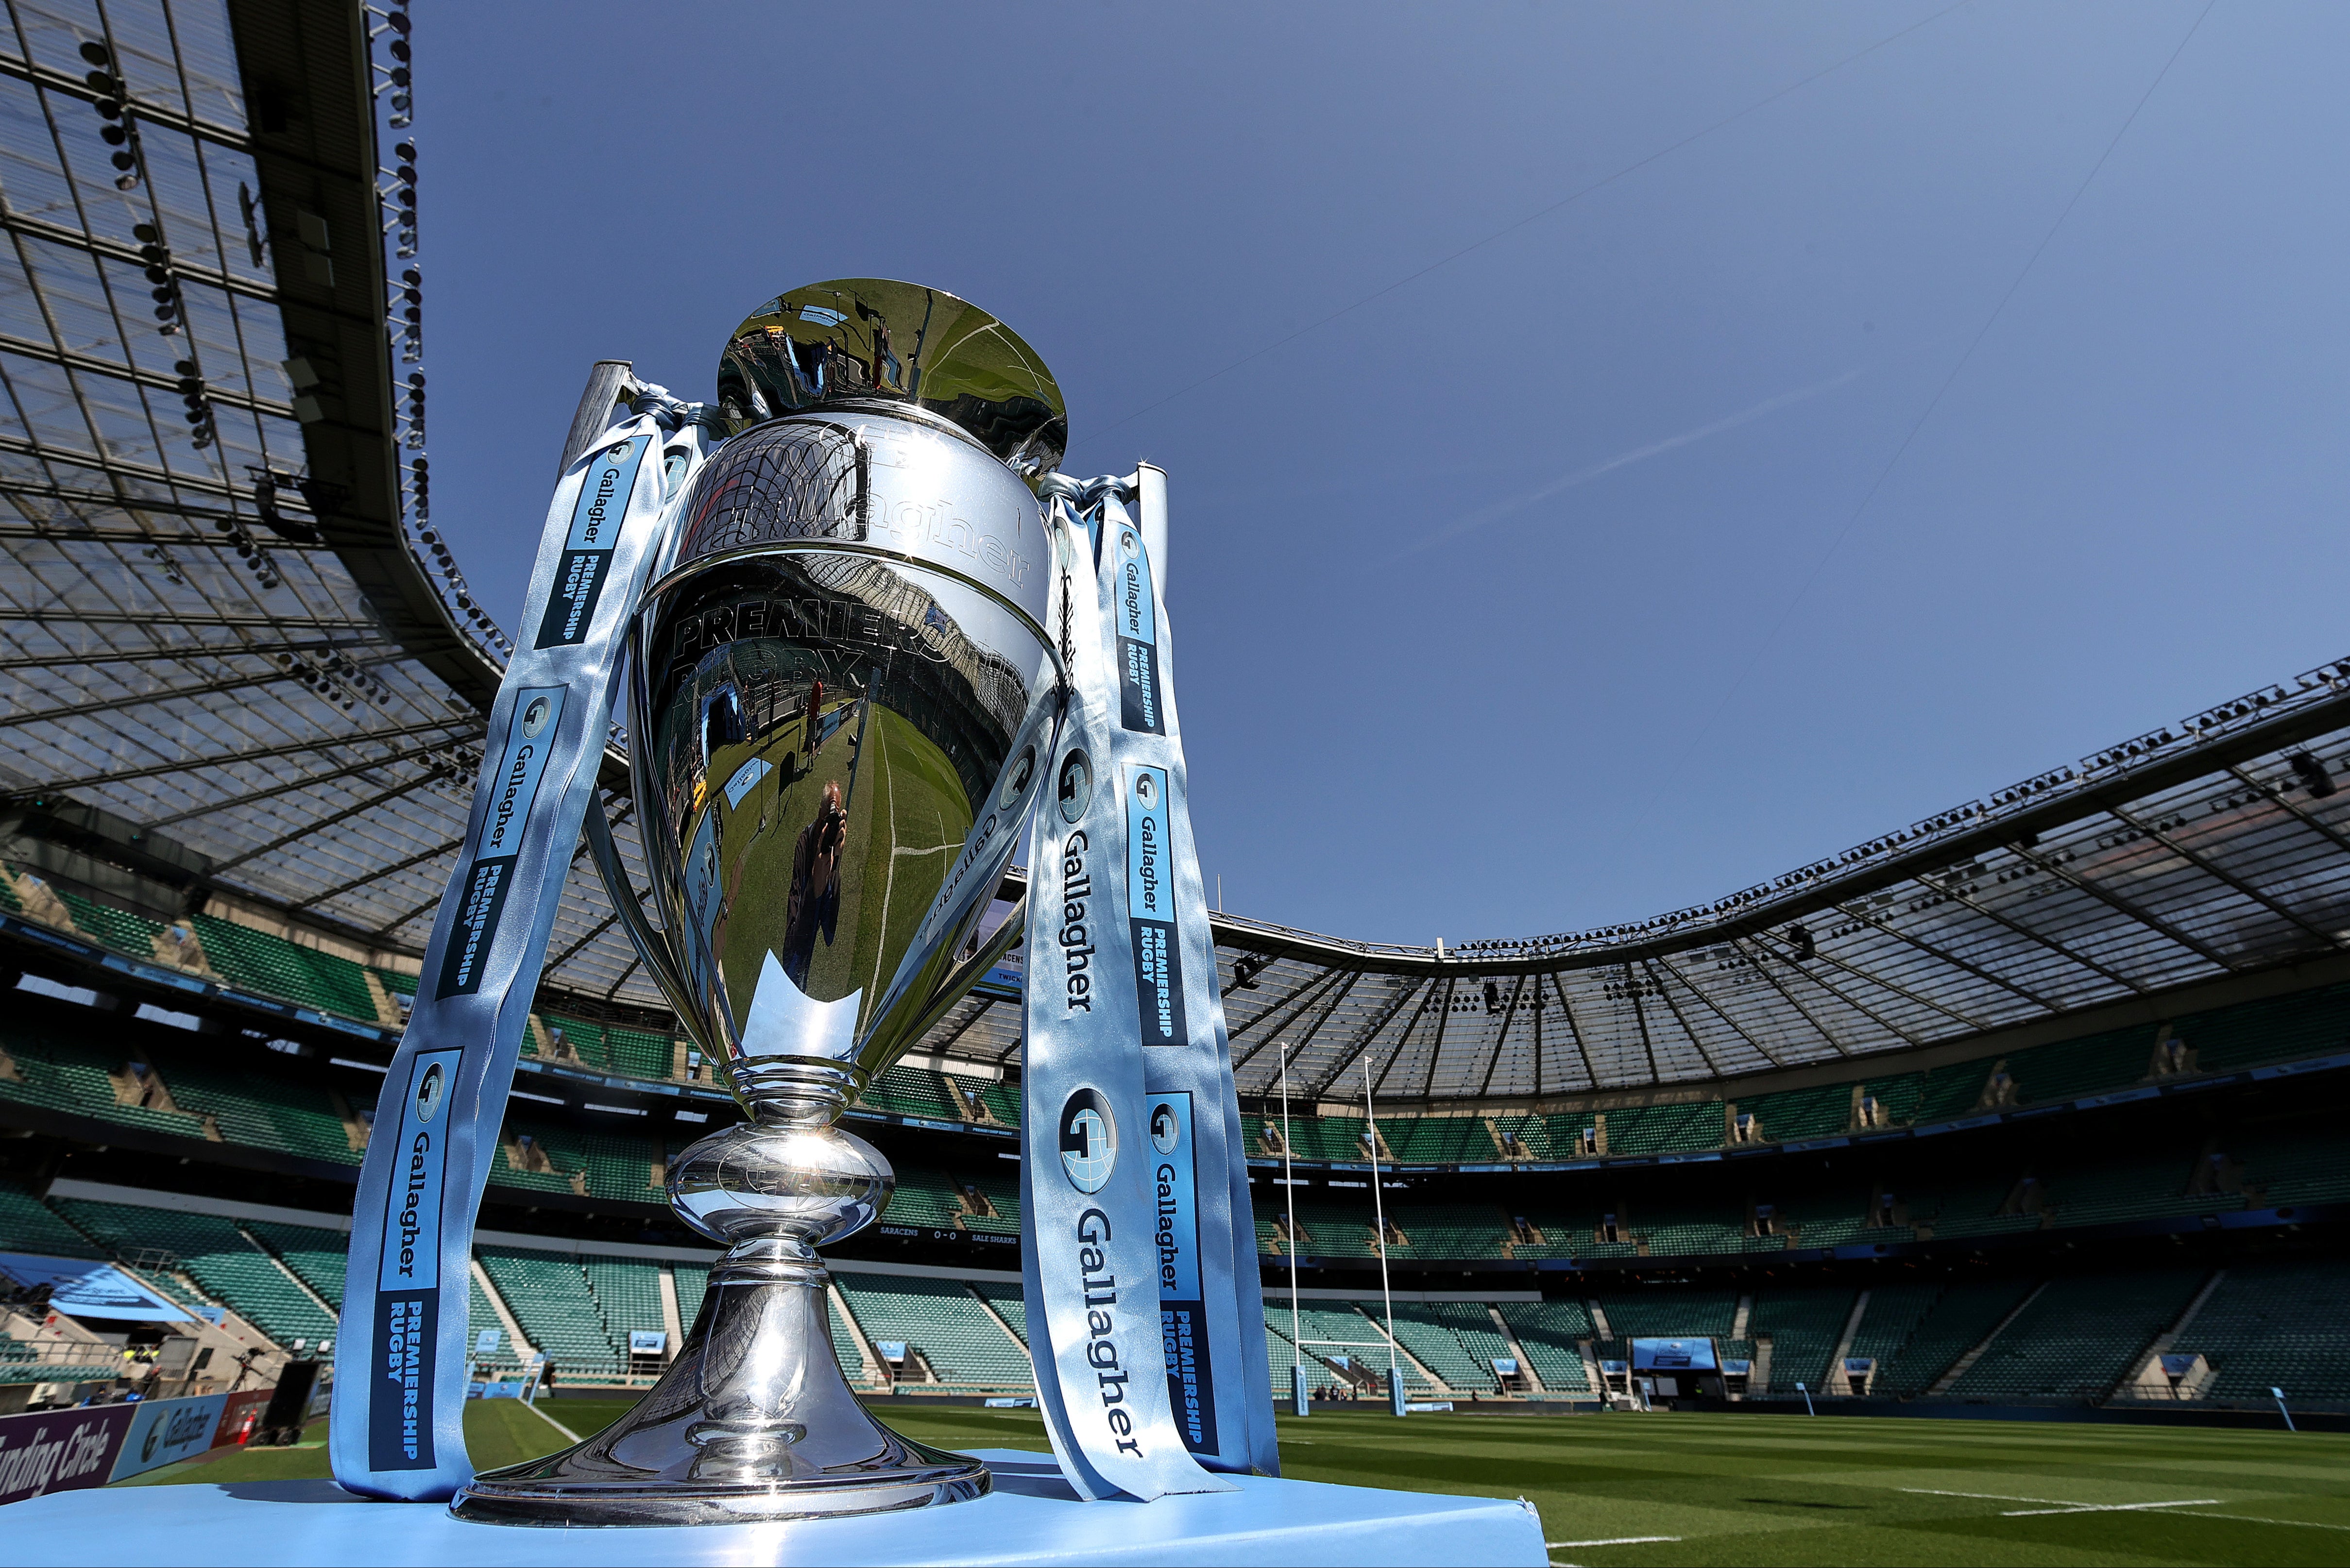 The Premiership final will be played at a sold out Twickenham